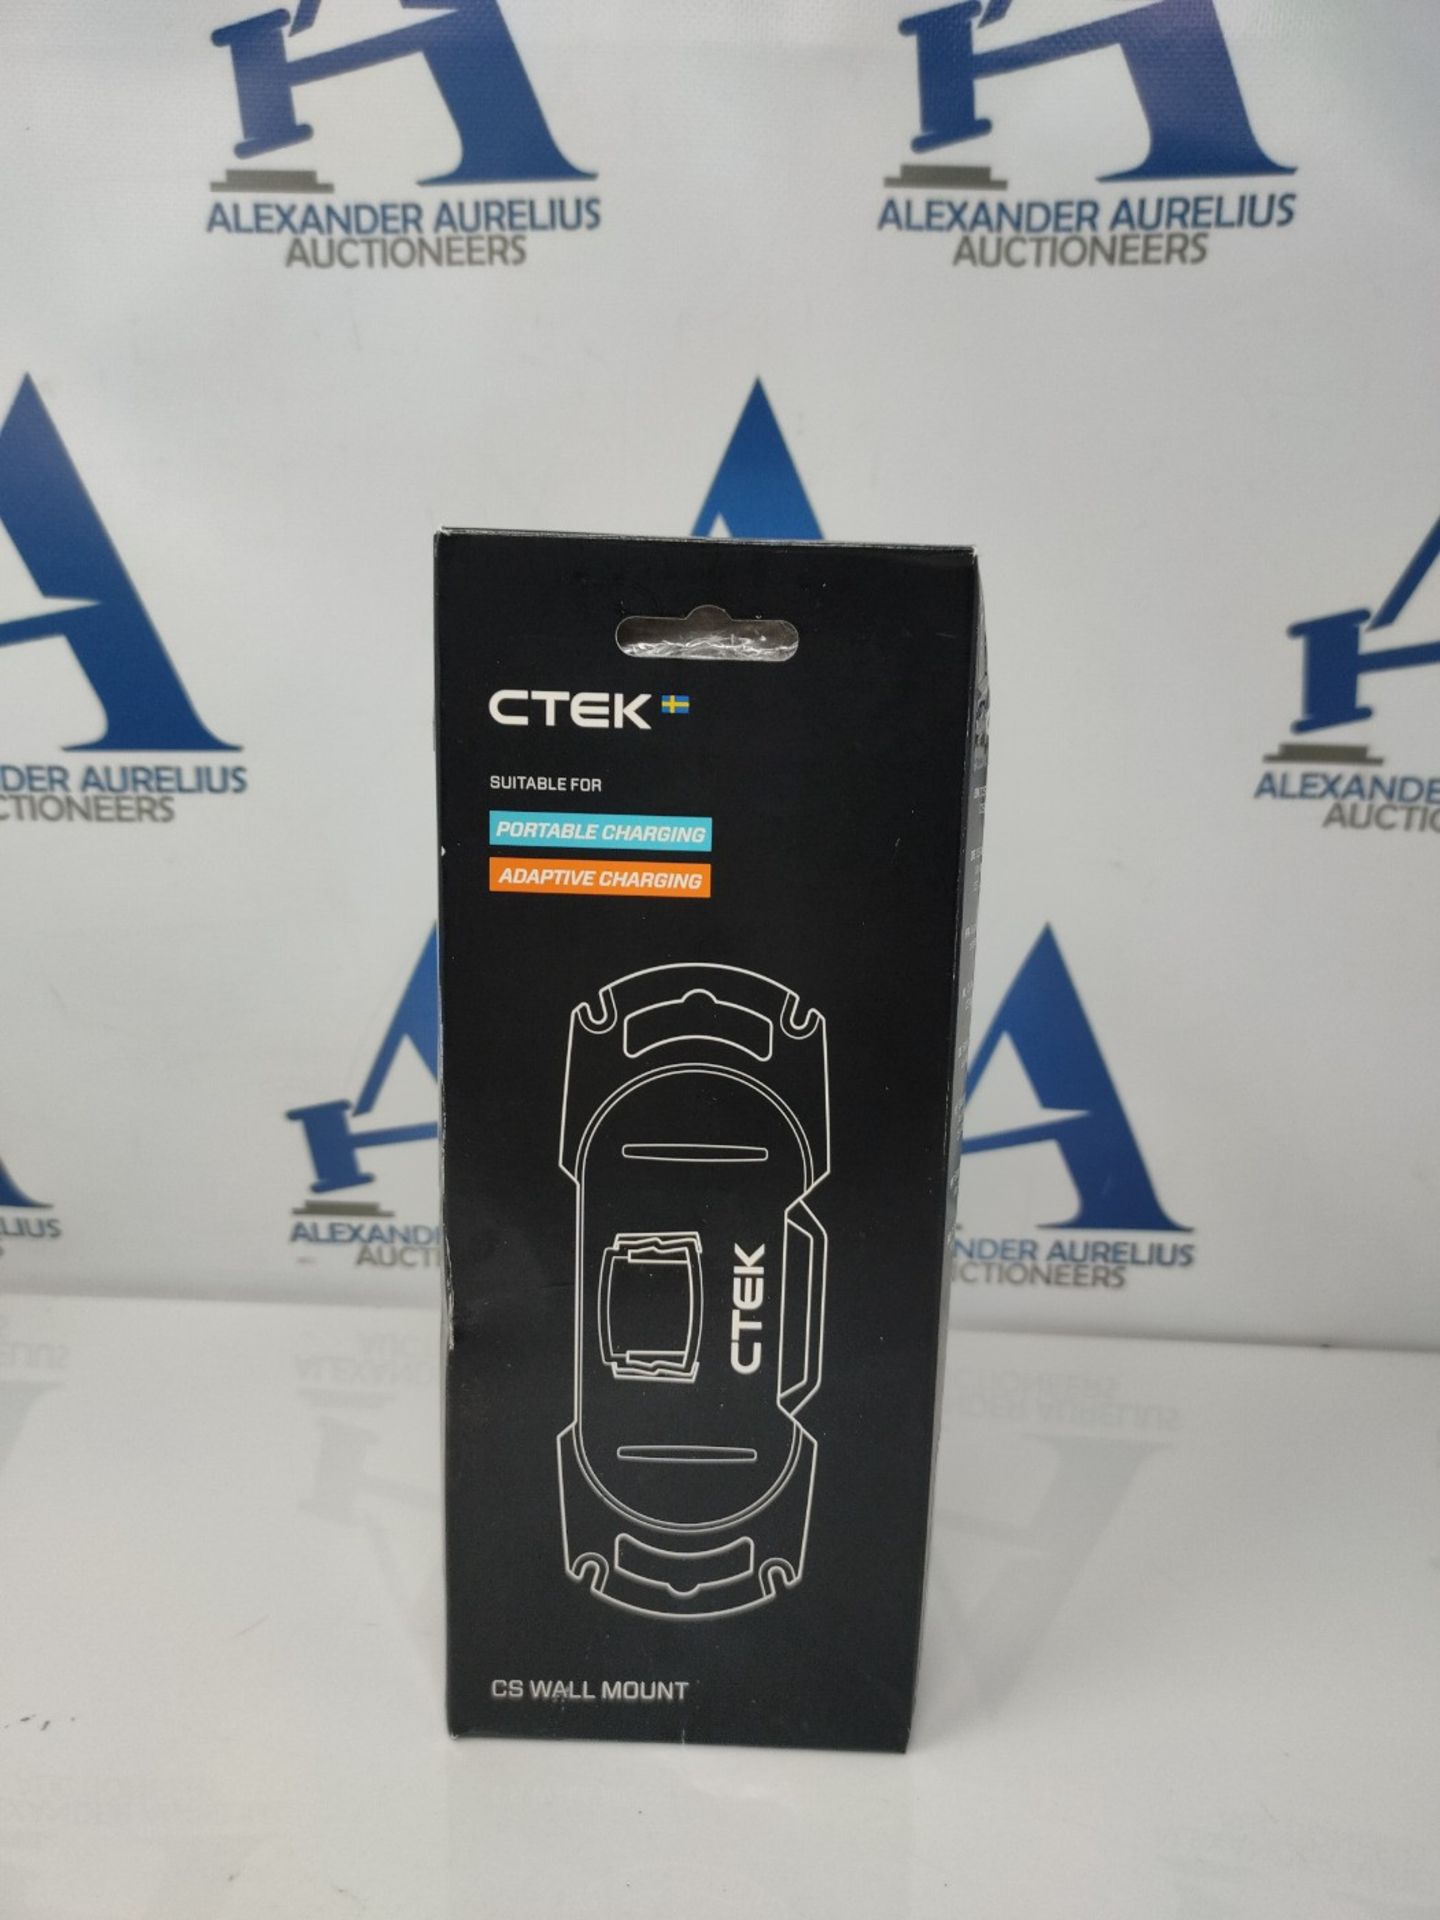 CTEK CS FREE Wall Mount 40-375 - for use with the CS FREE Portable Battery Charger Mai - Image 2 of 3